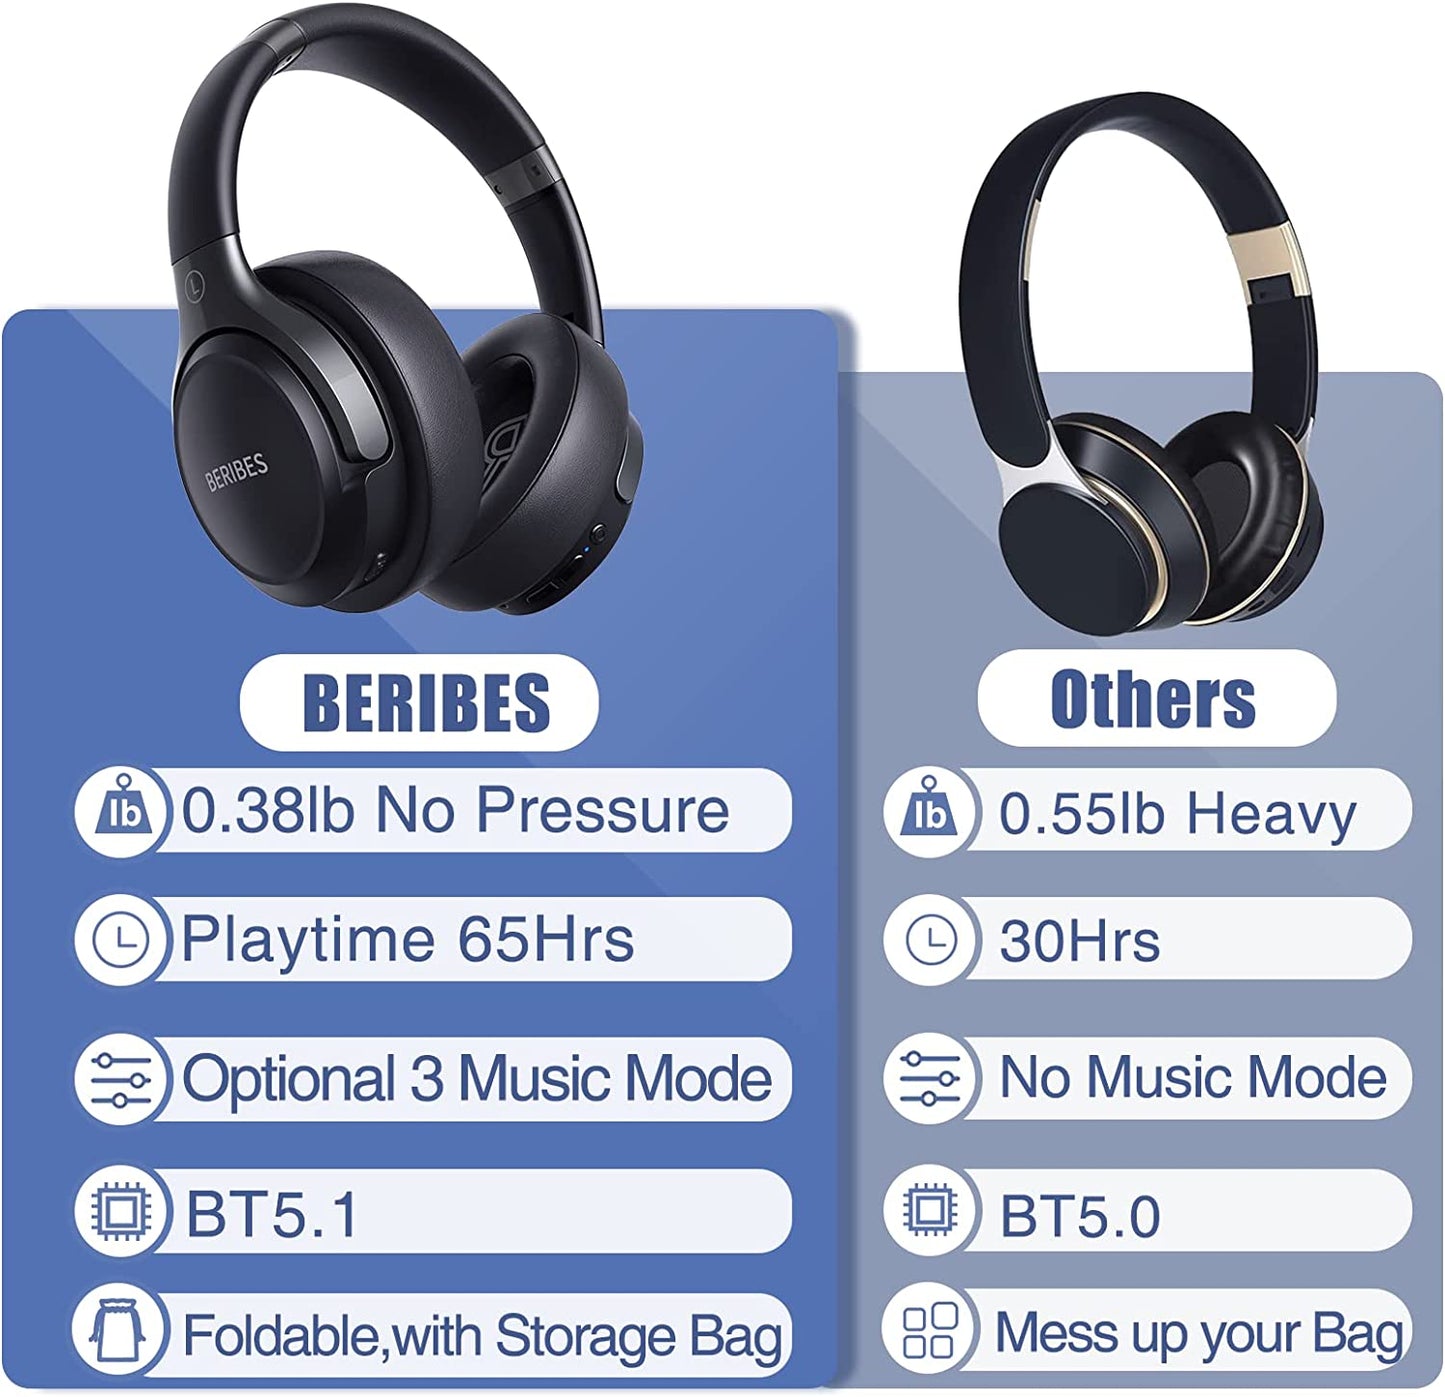 Bluetooth Headphones over Ear, 65H Playtime and 3 EQ Music Modes Wireless Headphones with Microphone, Hifi Stereo Foldable Lightweight Headset, Deep Bass for Home Office Cellphone PC TV